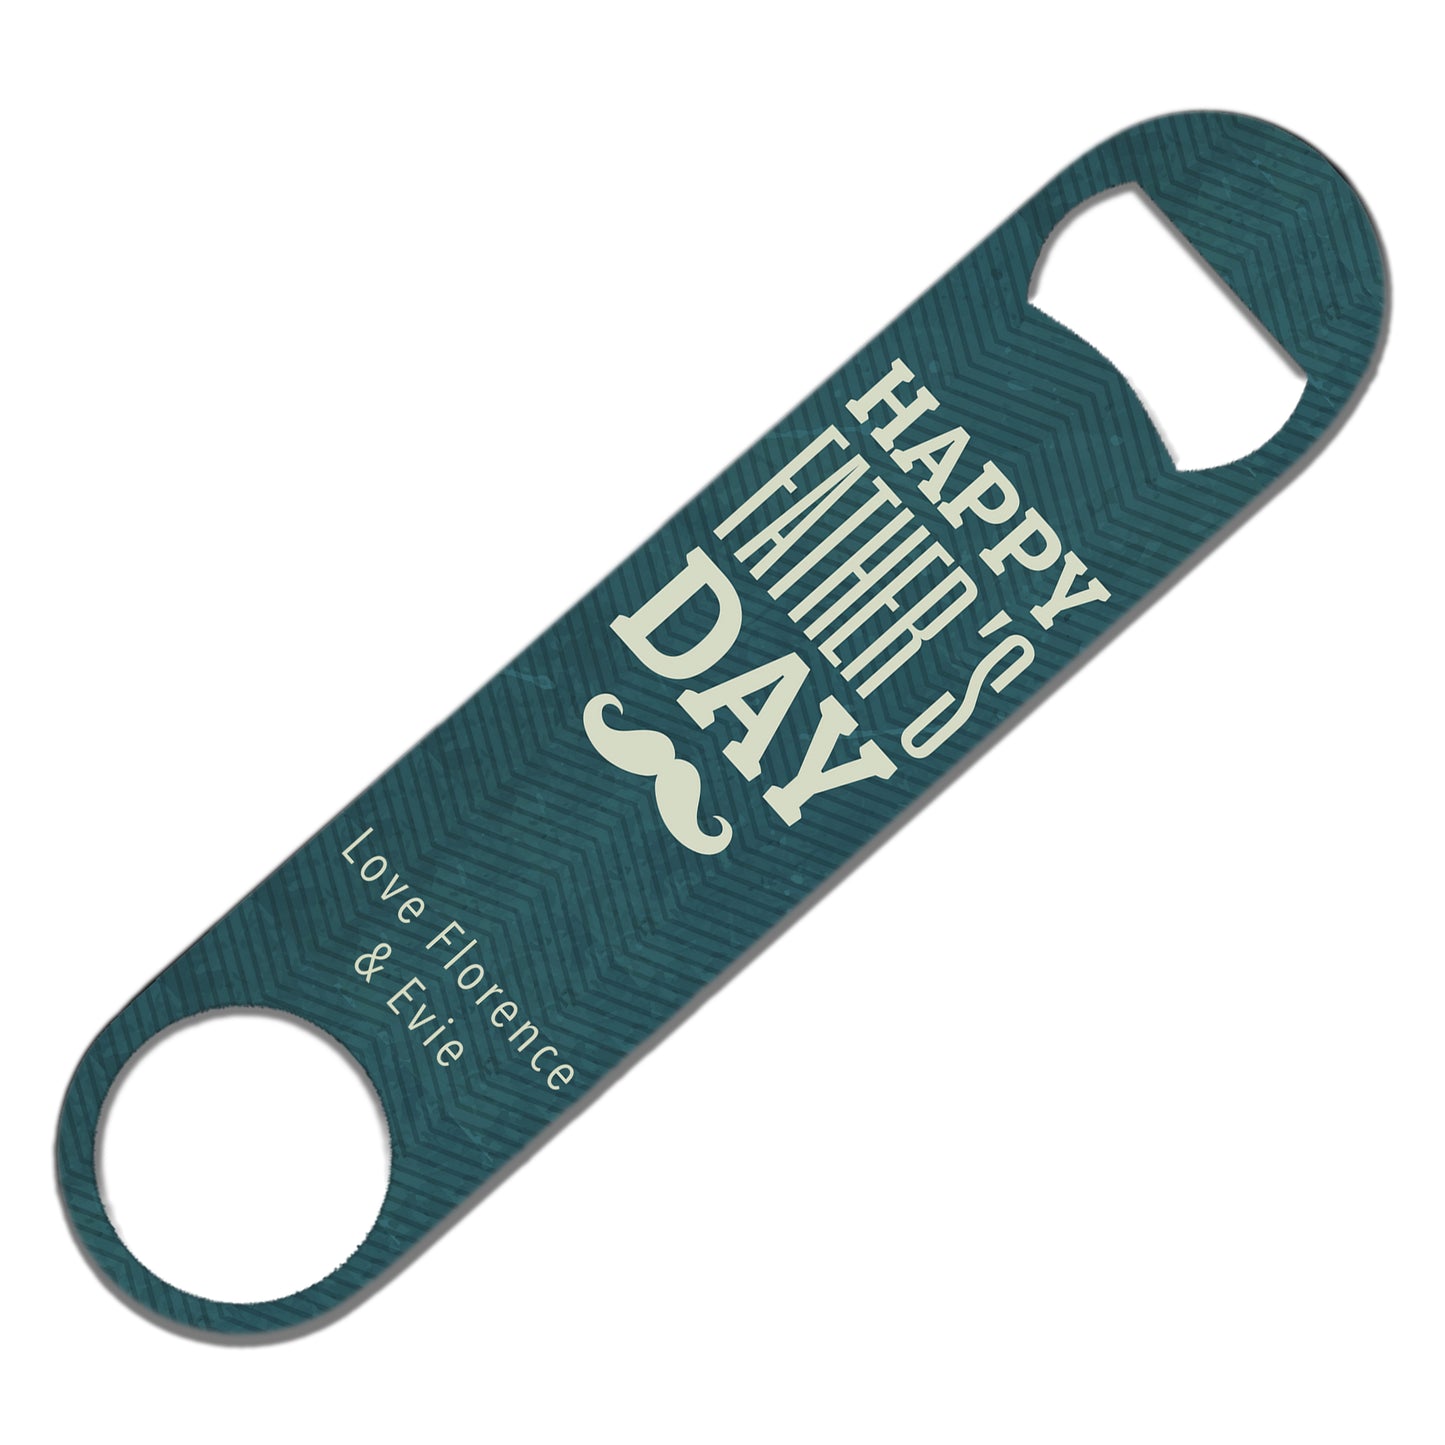 Personalised Moustache Bottle Opener - Happy Father's Day Love Name